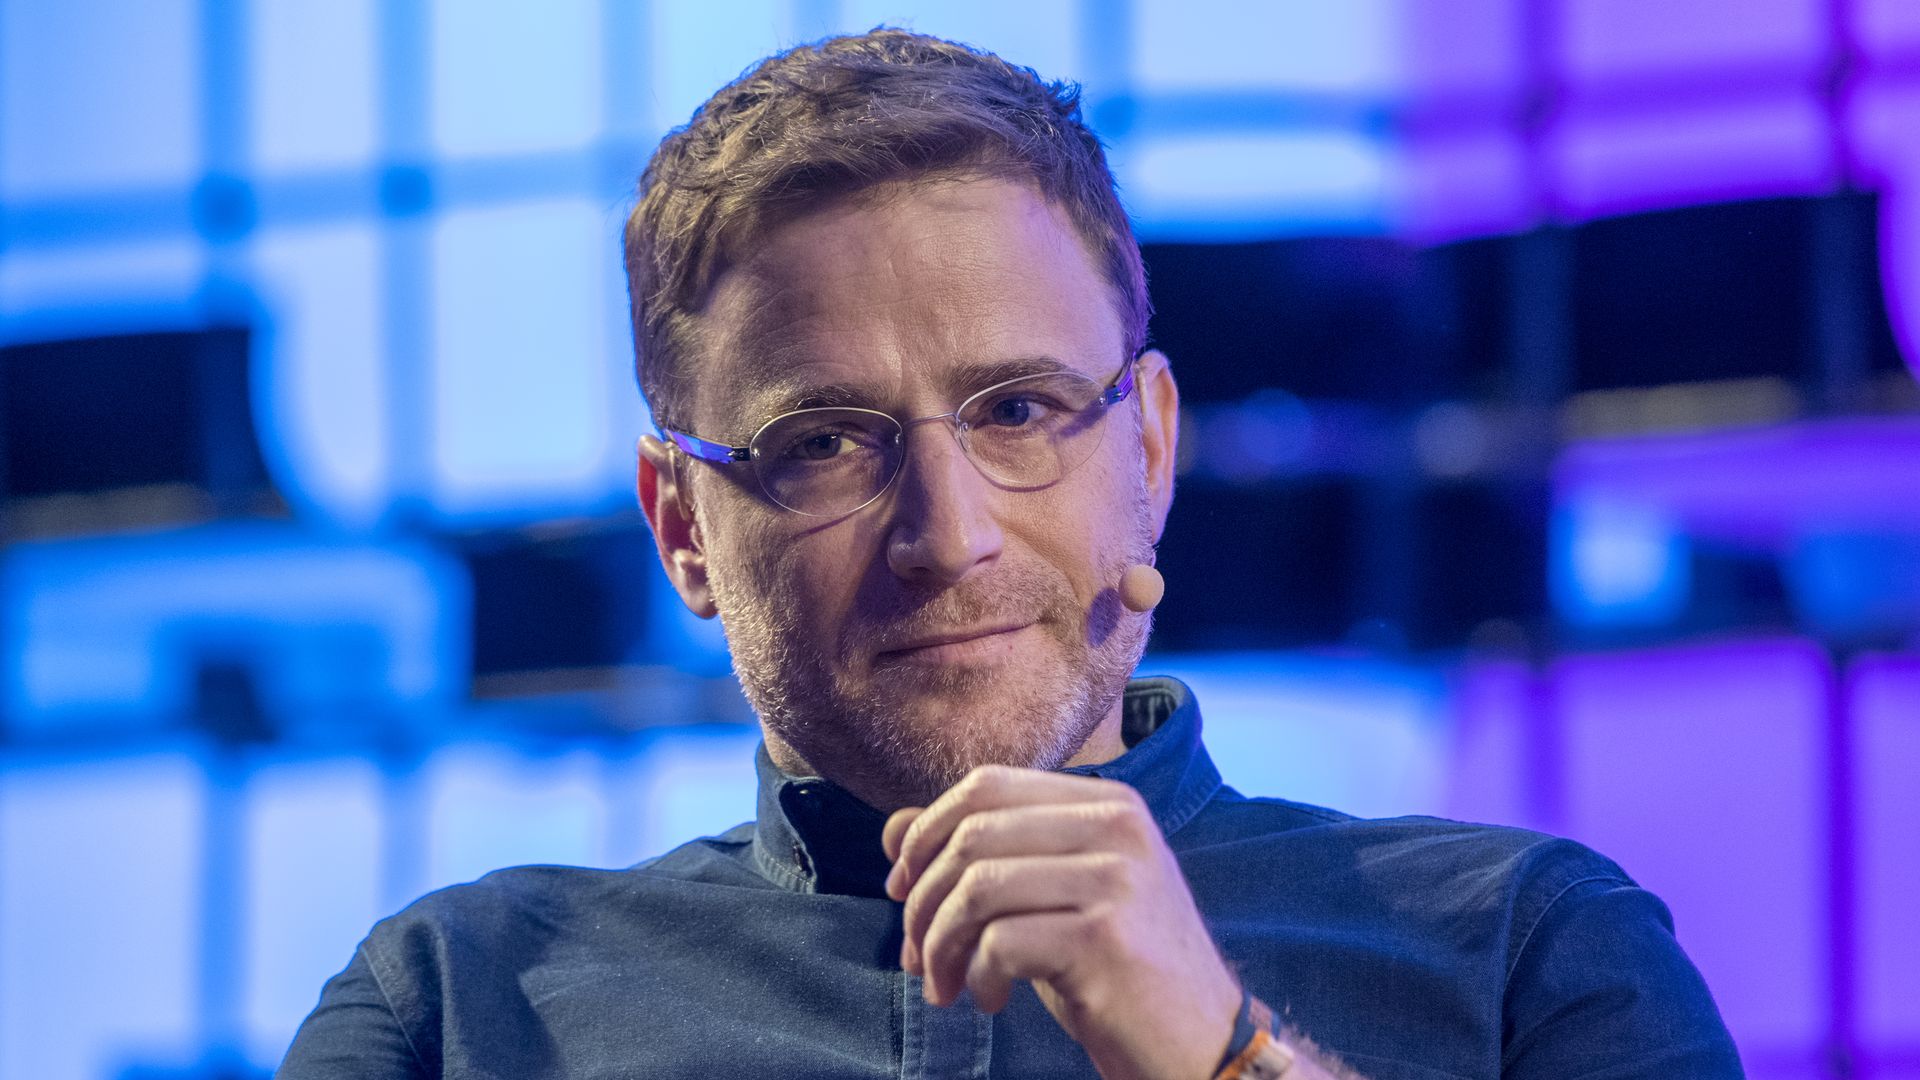 Stewart Butterfield, Co-Founder and CEO, Slack